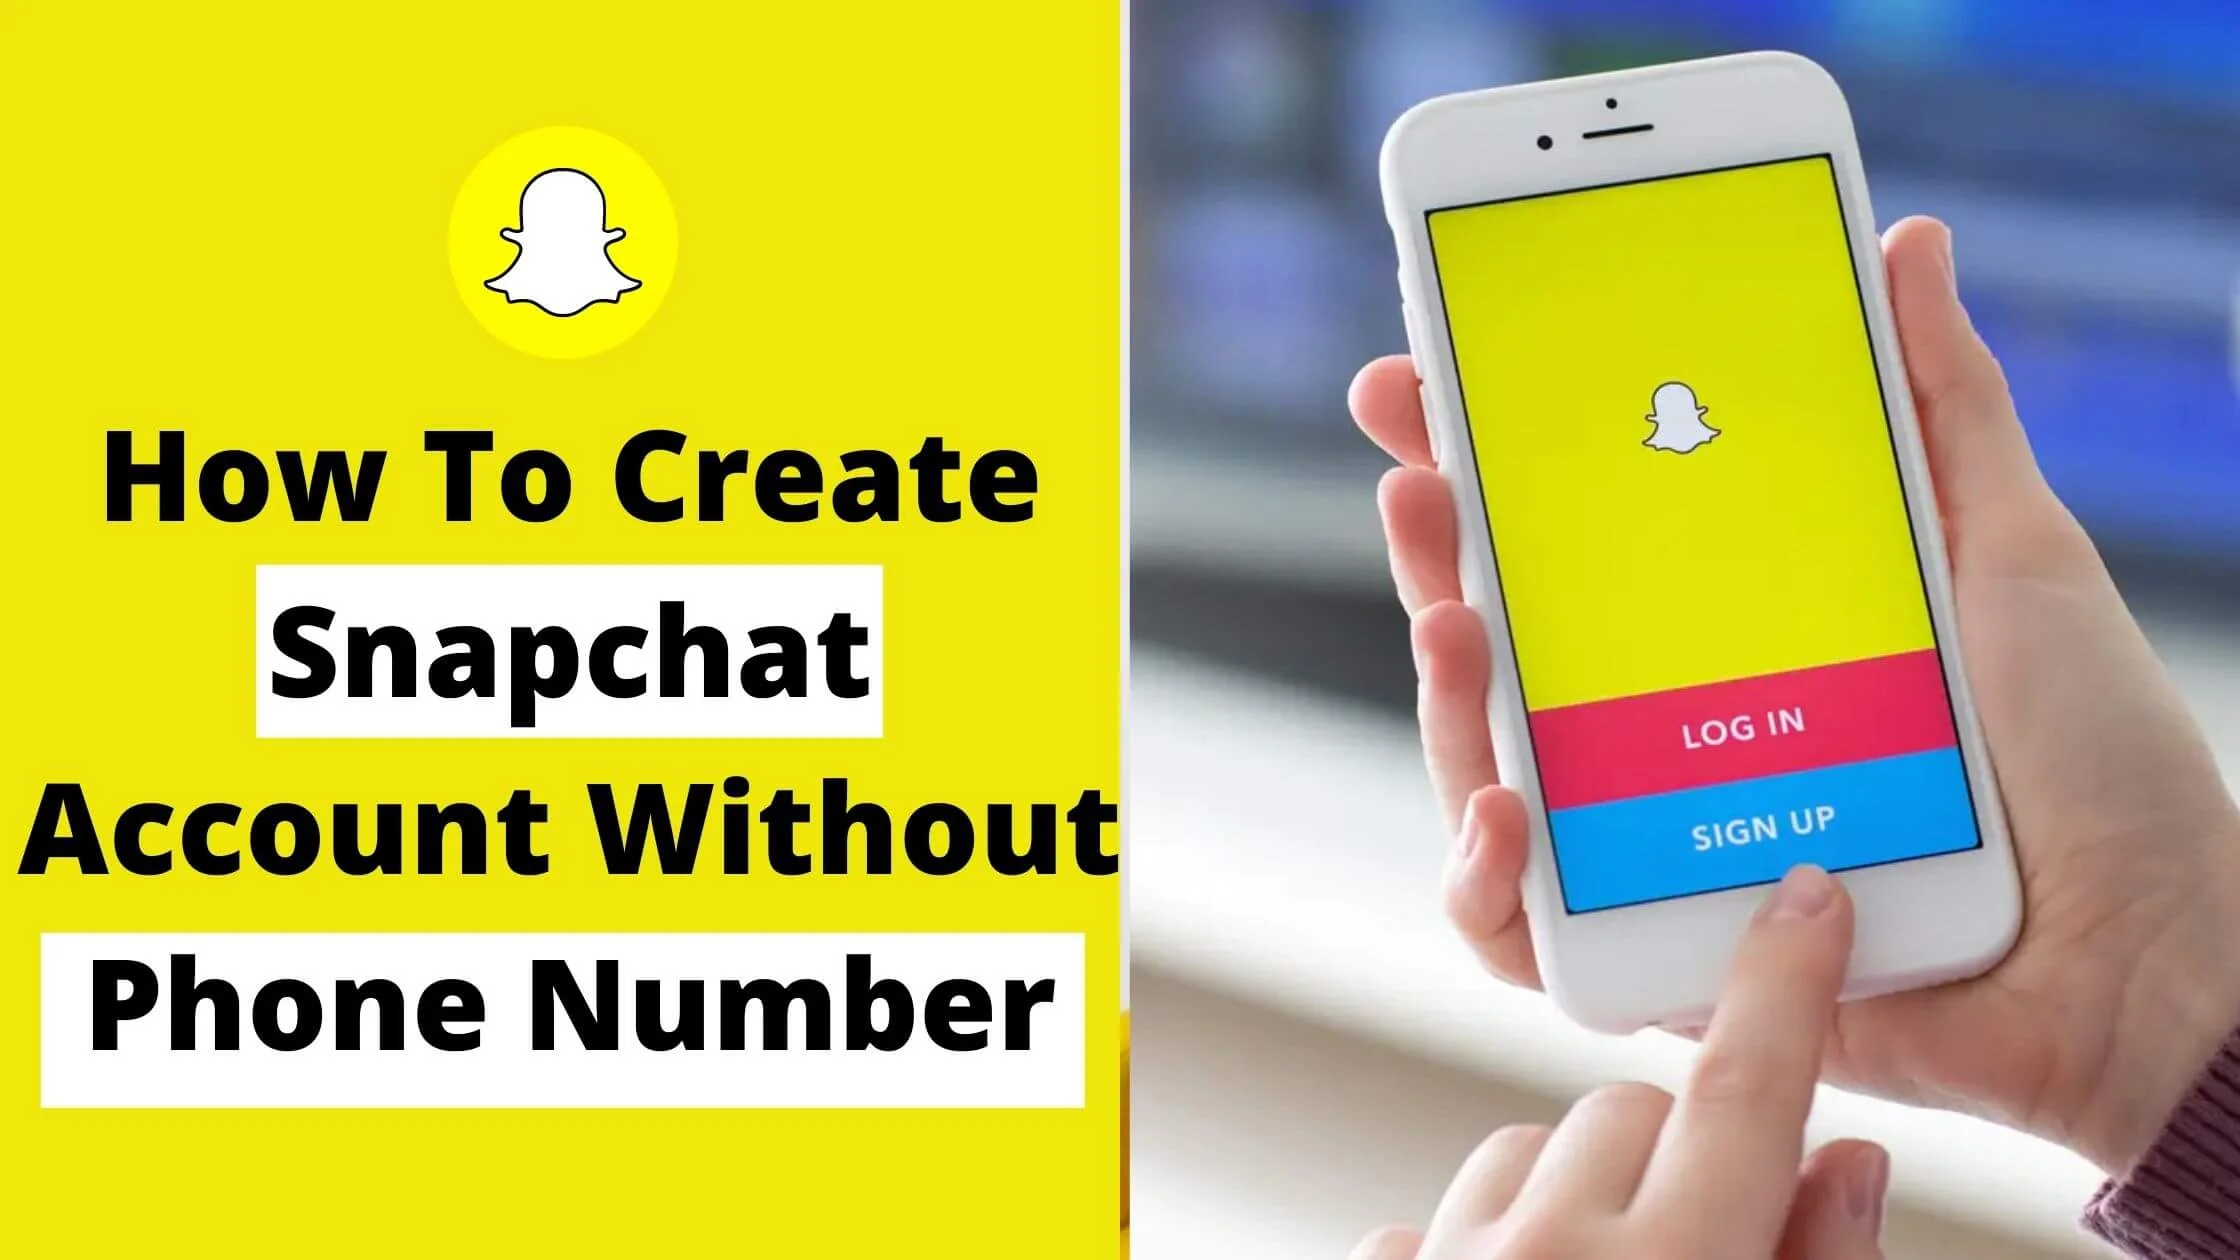 How to Create Snapchat Account Without Phone Number